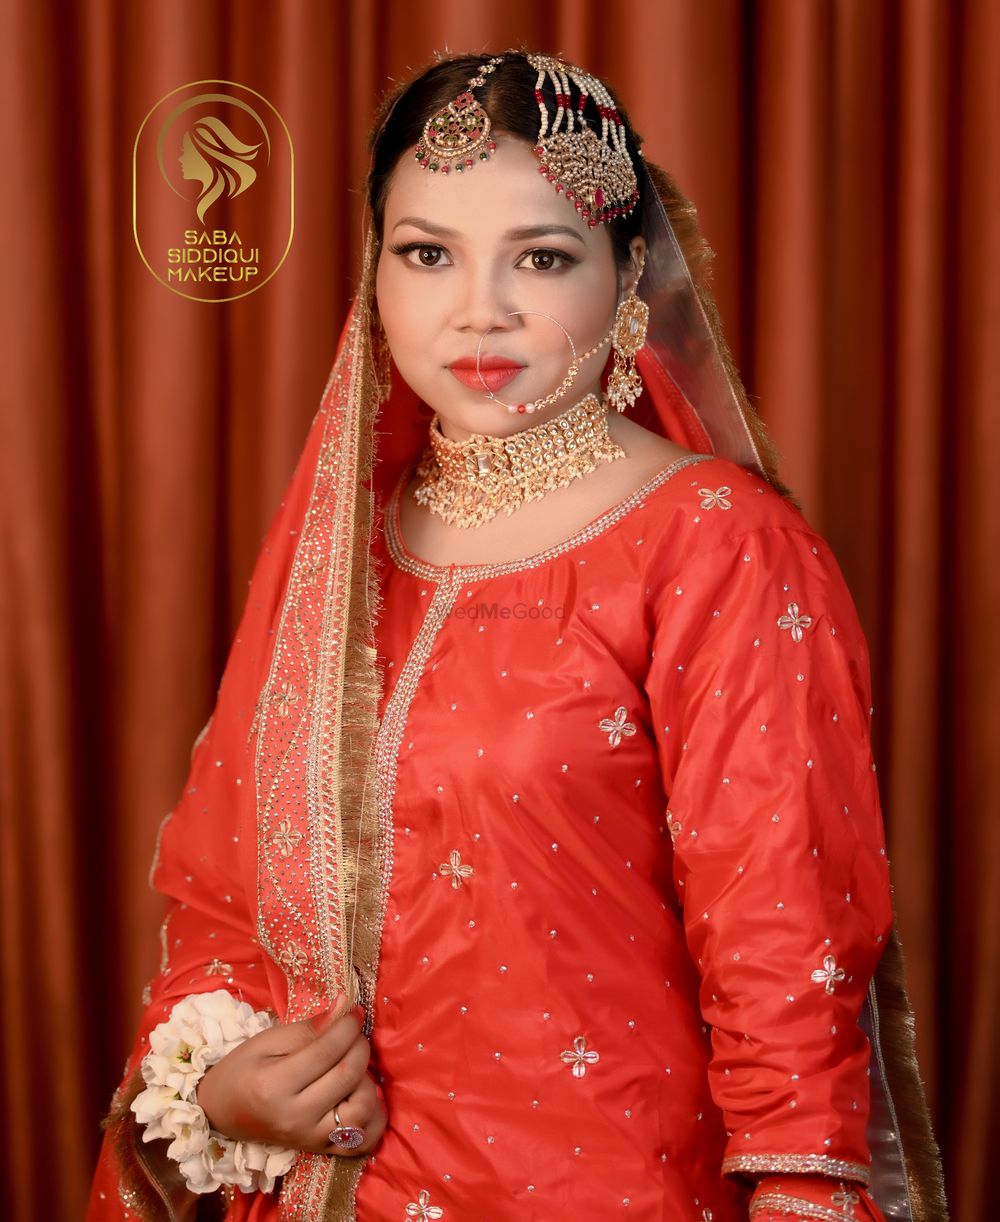 Photo From Muslim Bride - By Saba Siddiqui Makeup